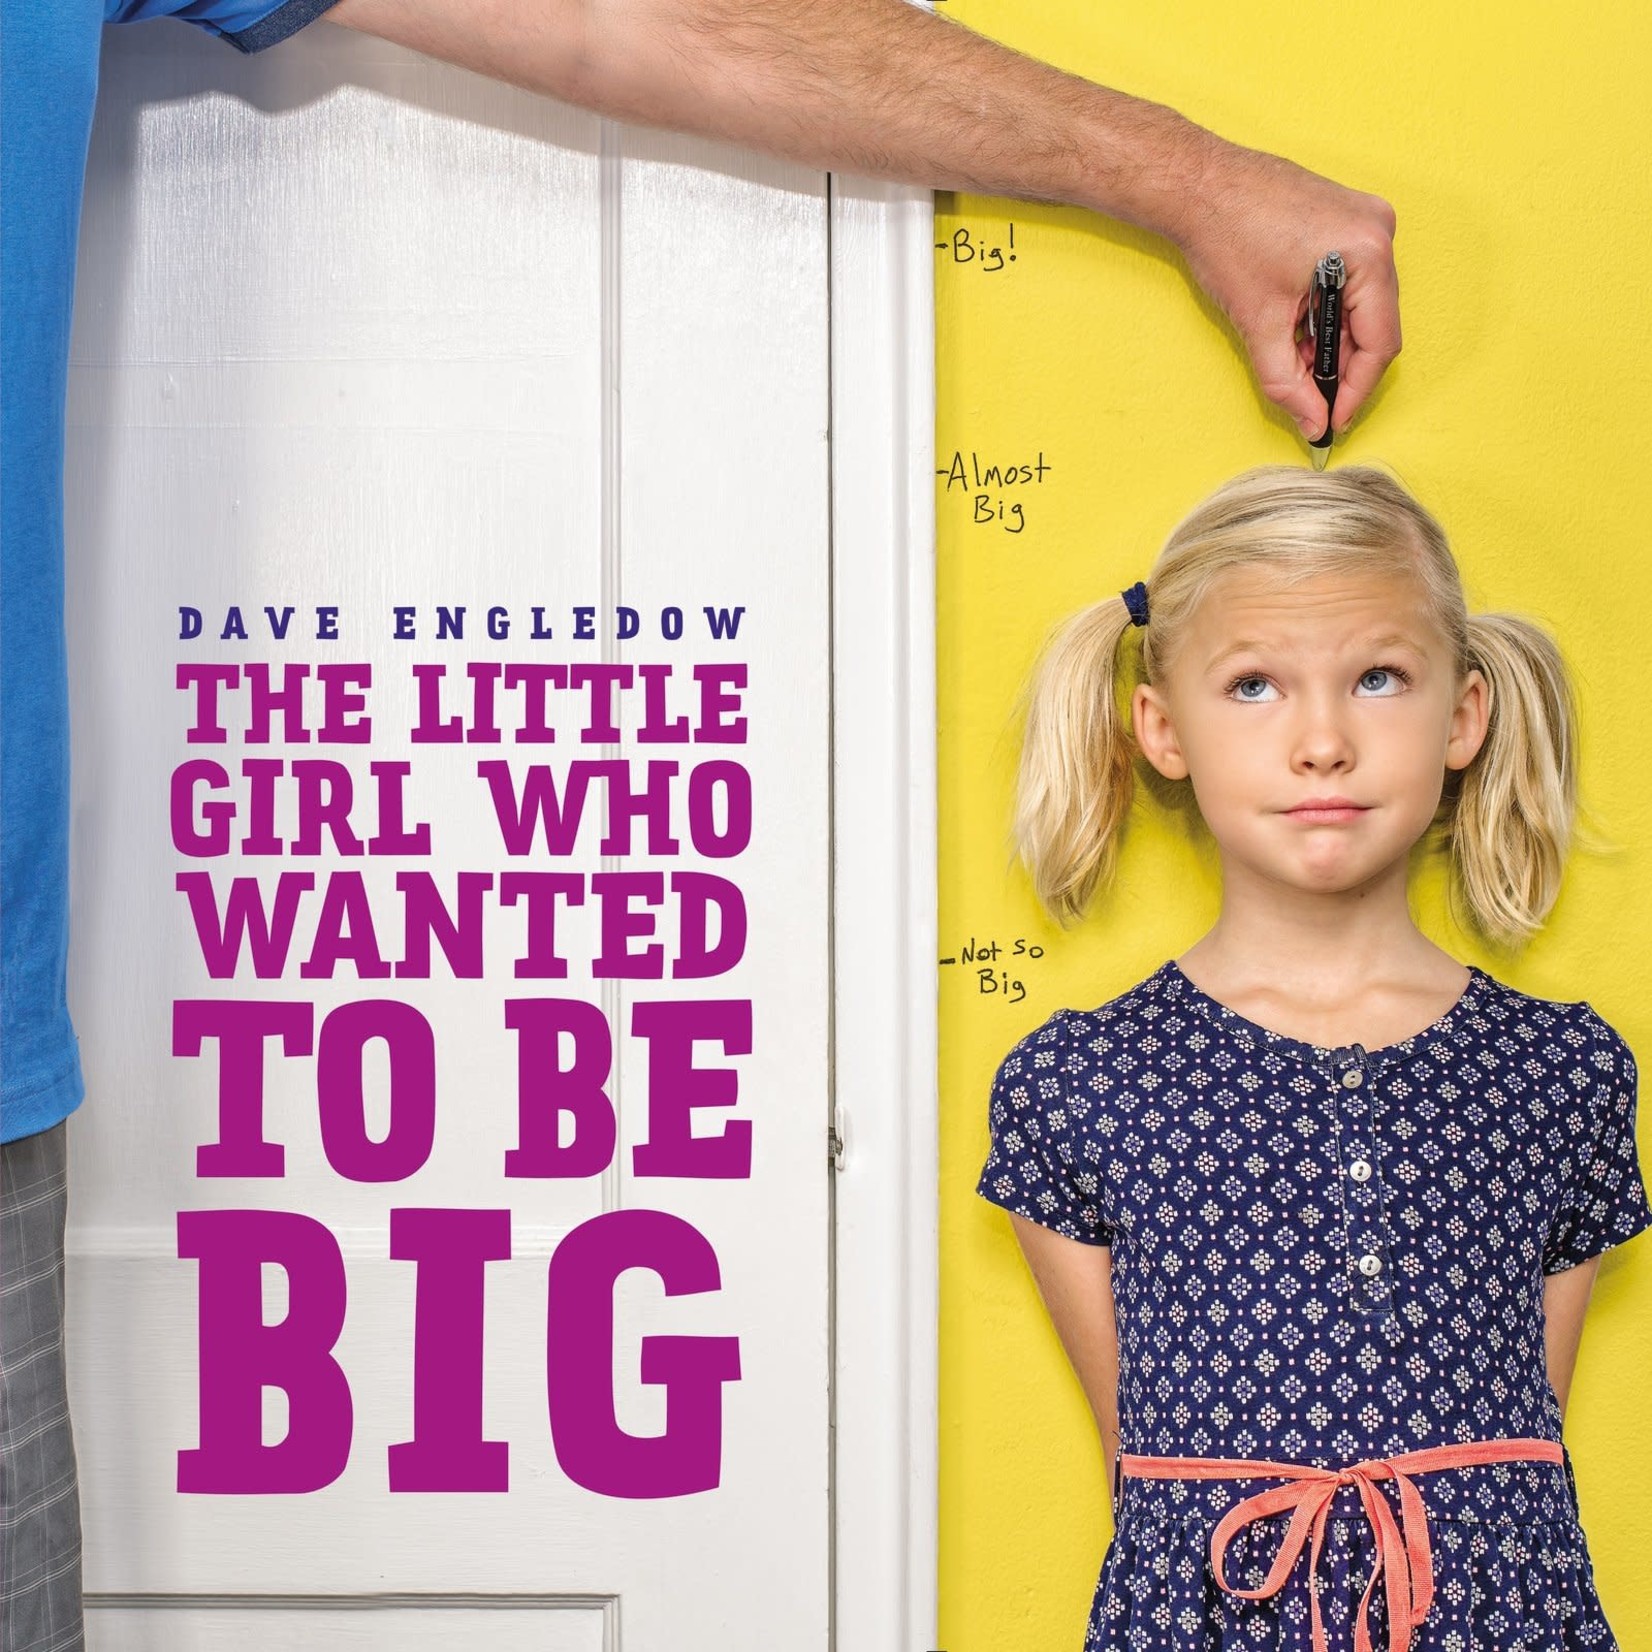 The Little Girl Who Wanted to be Big